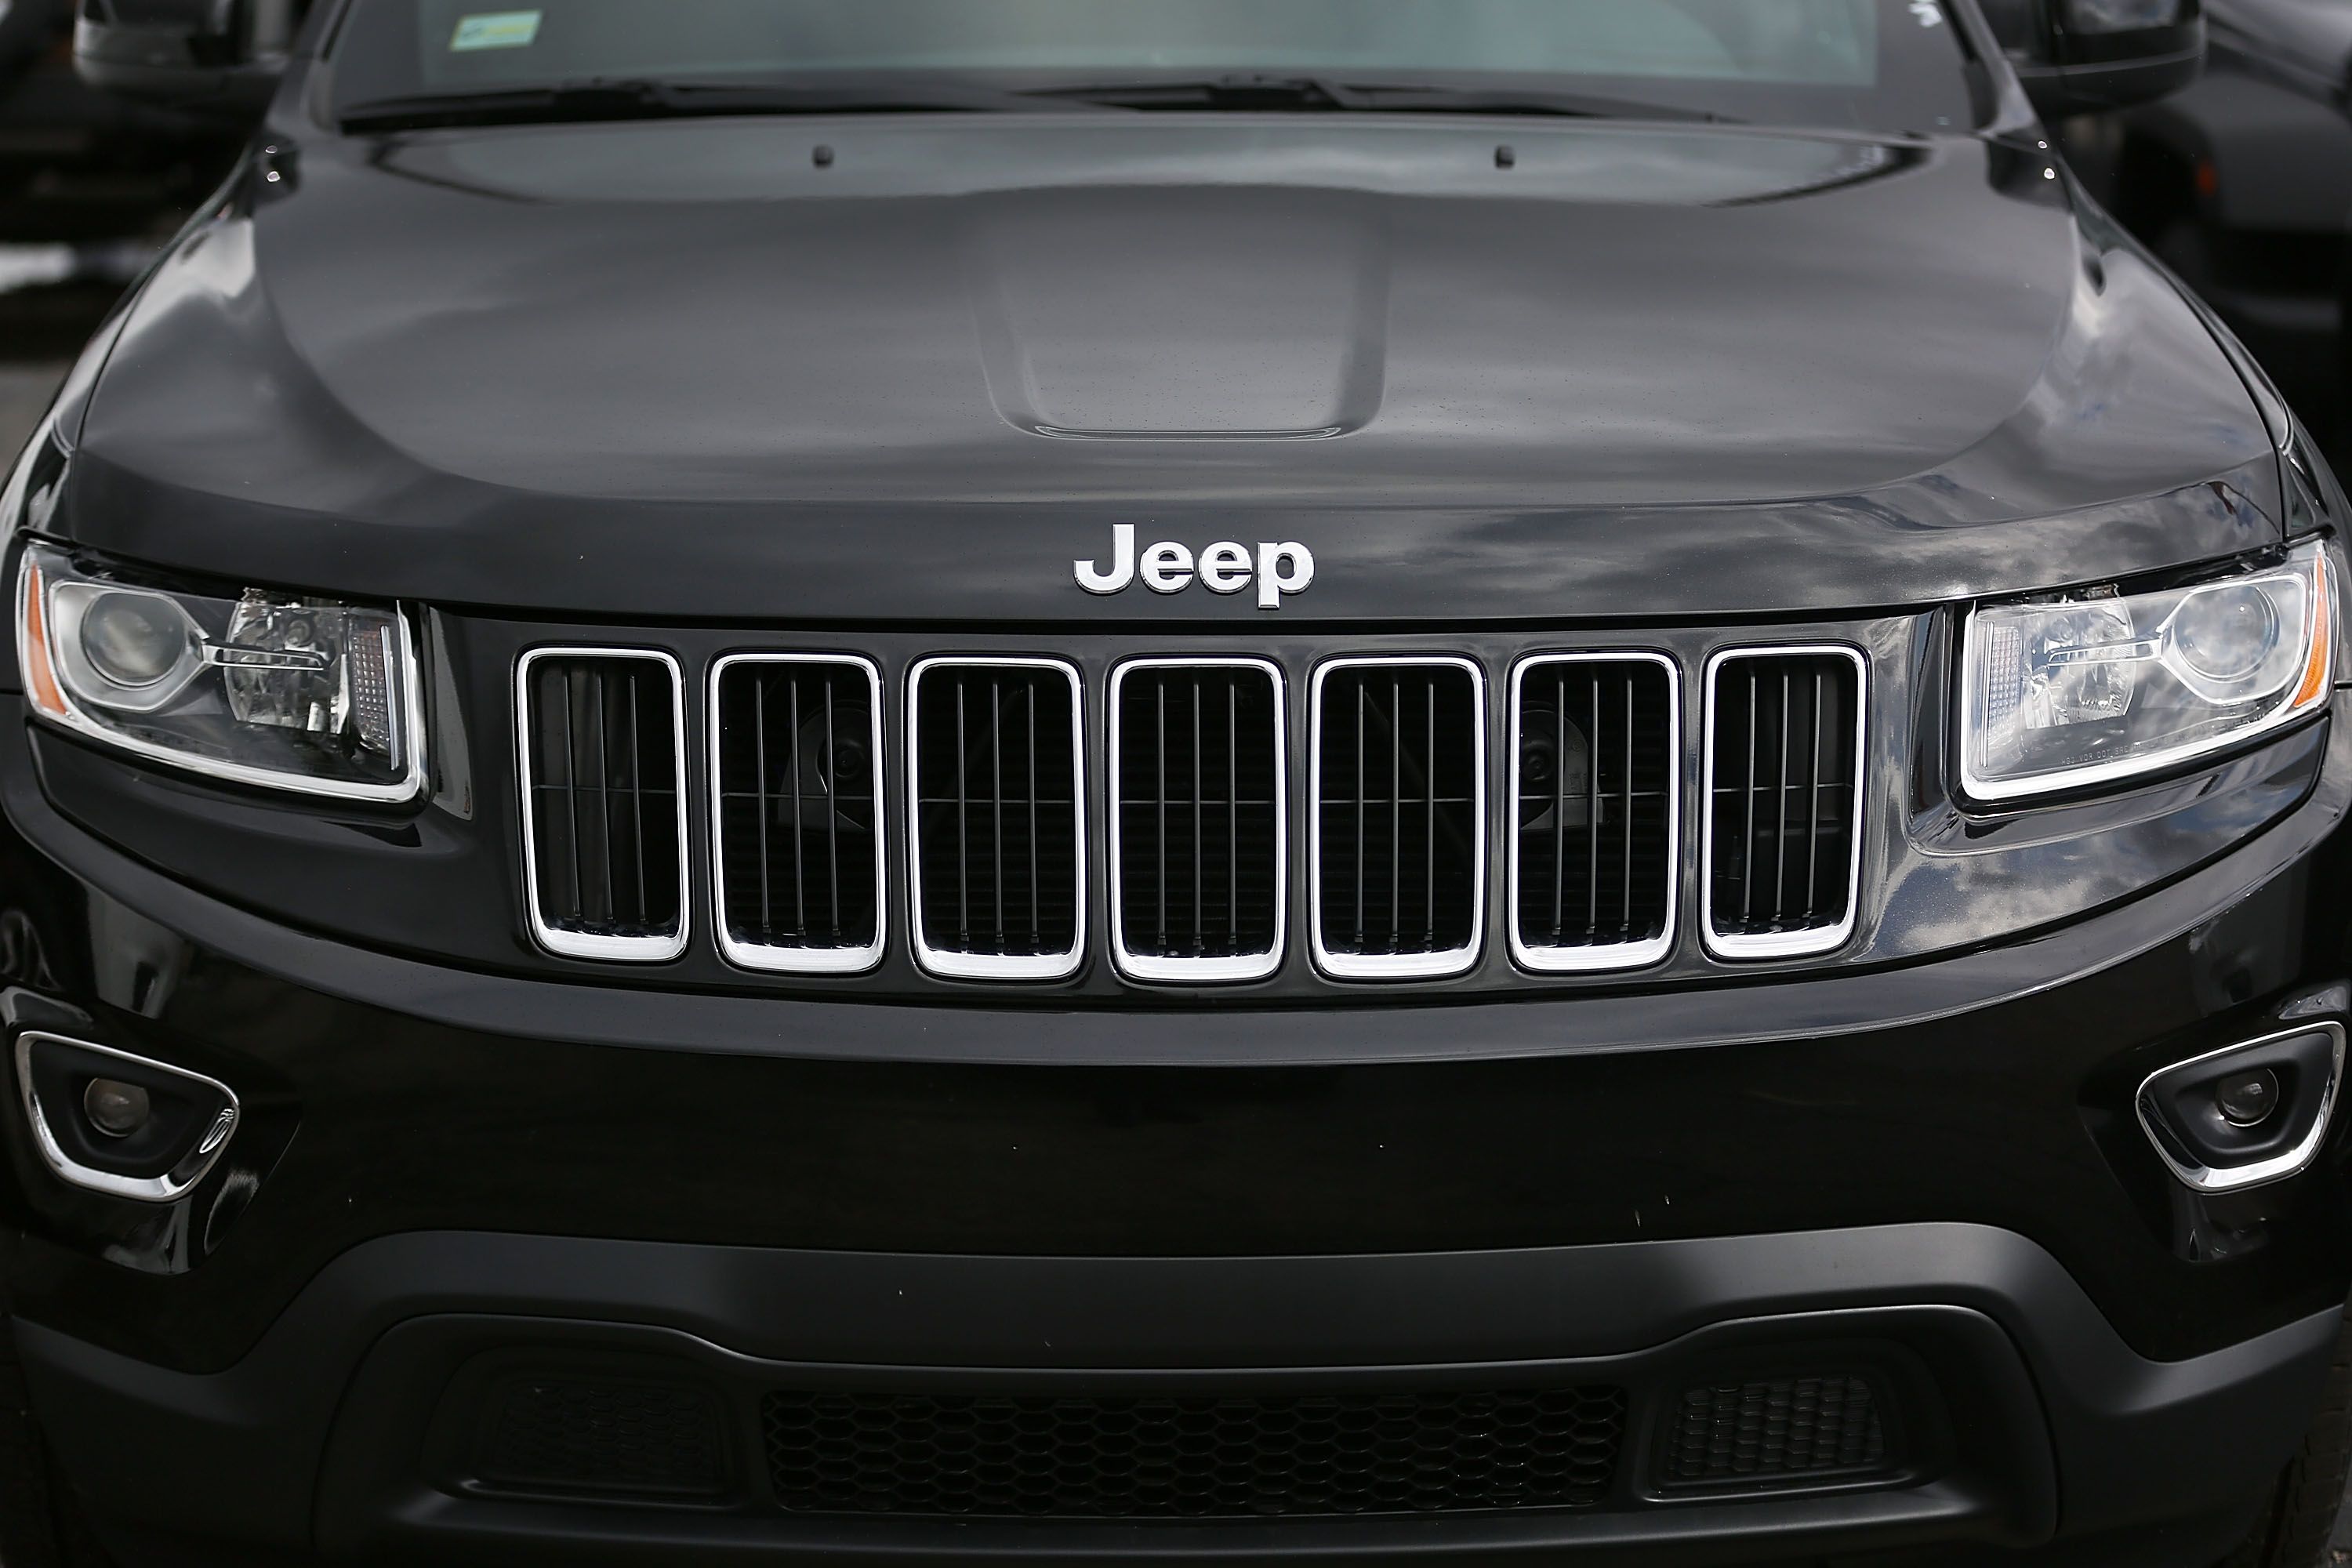 Jeep Grand Cherokee Trim Levels: Everything You Need To Know